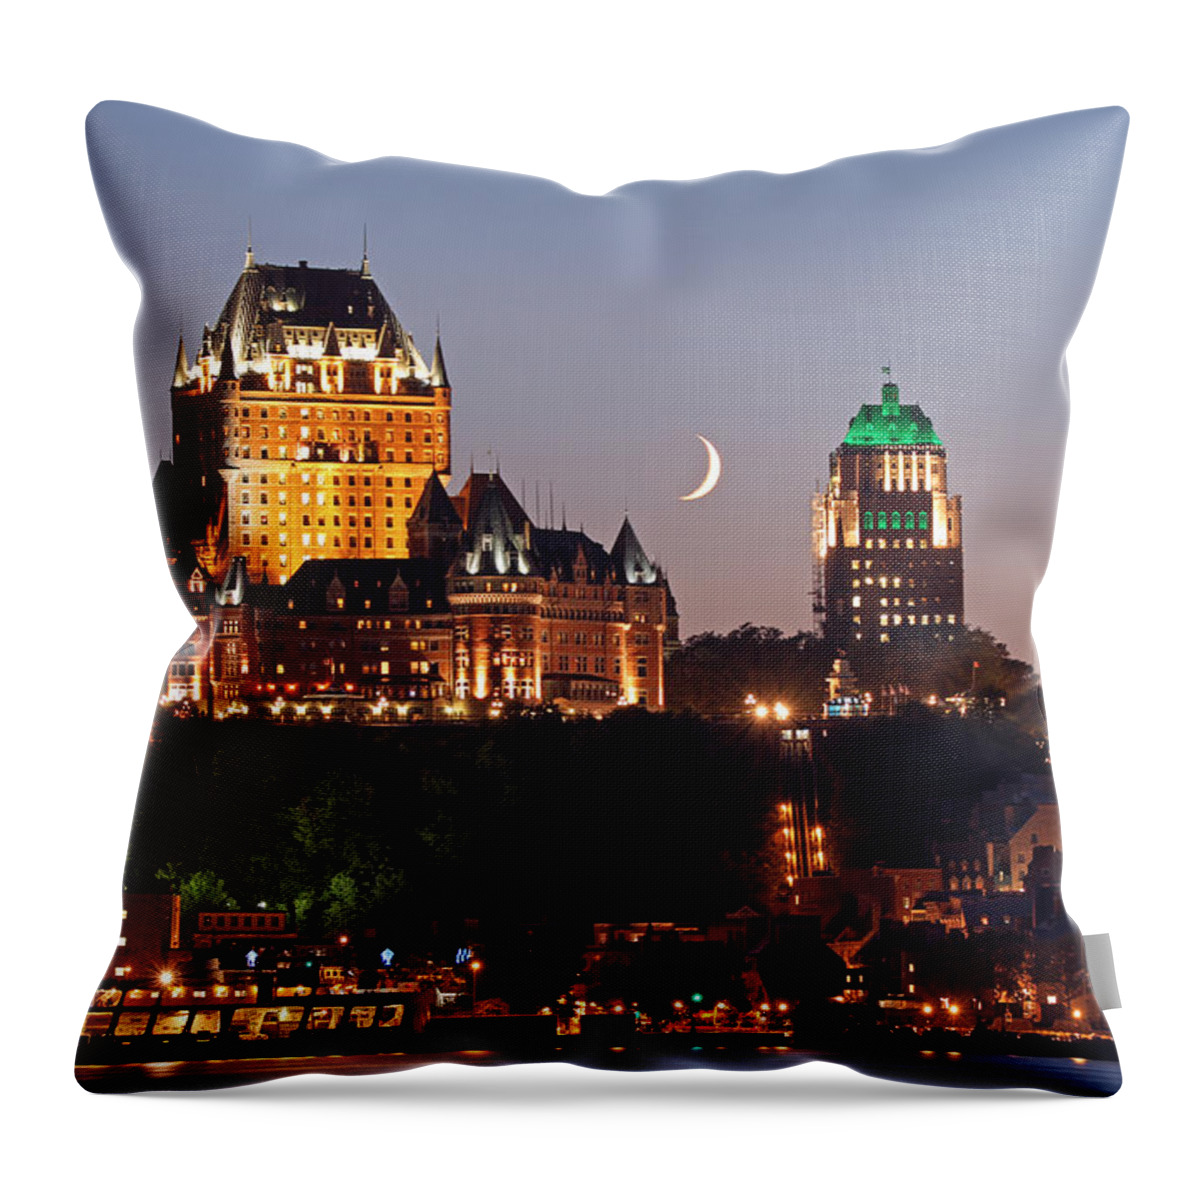 Quebec City Throw Pillow featuring the photograph Fairmont Le Chateau Frontenac by Juergen Roth